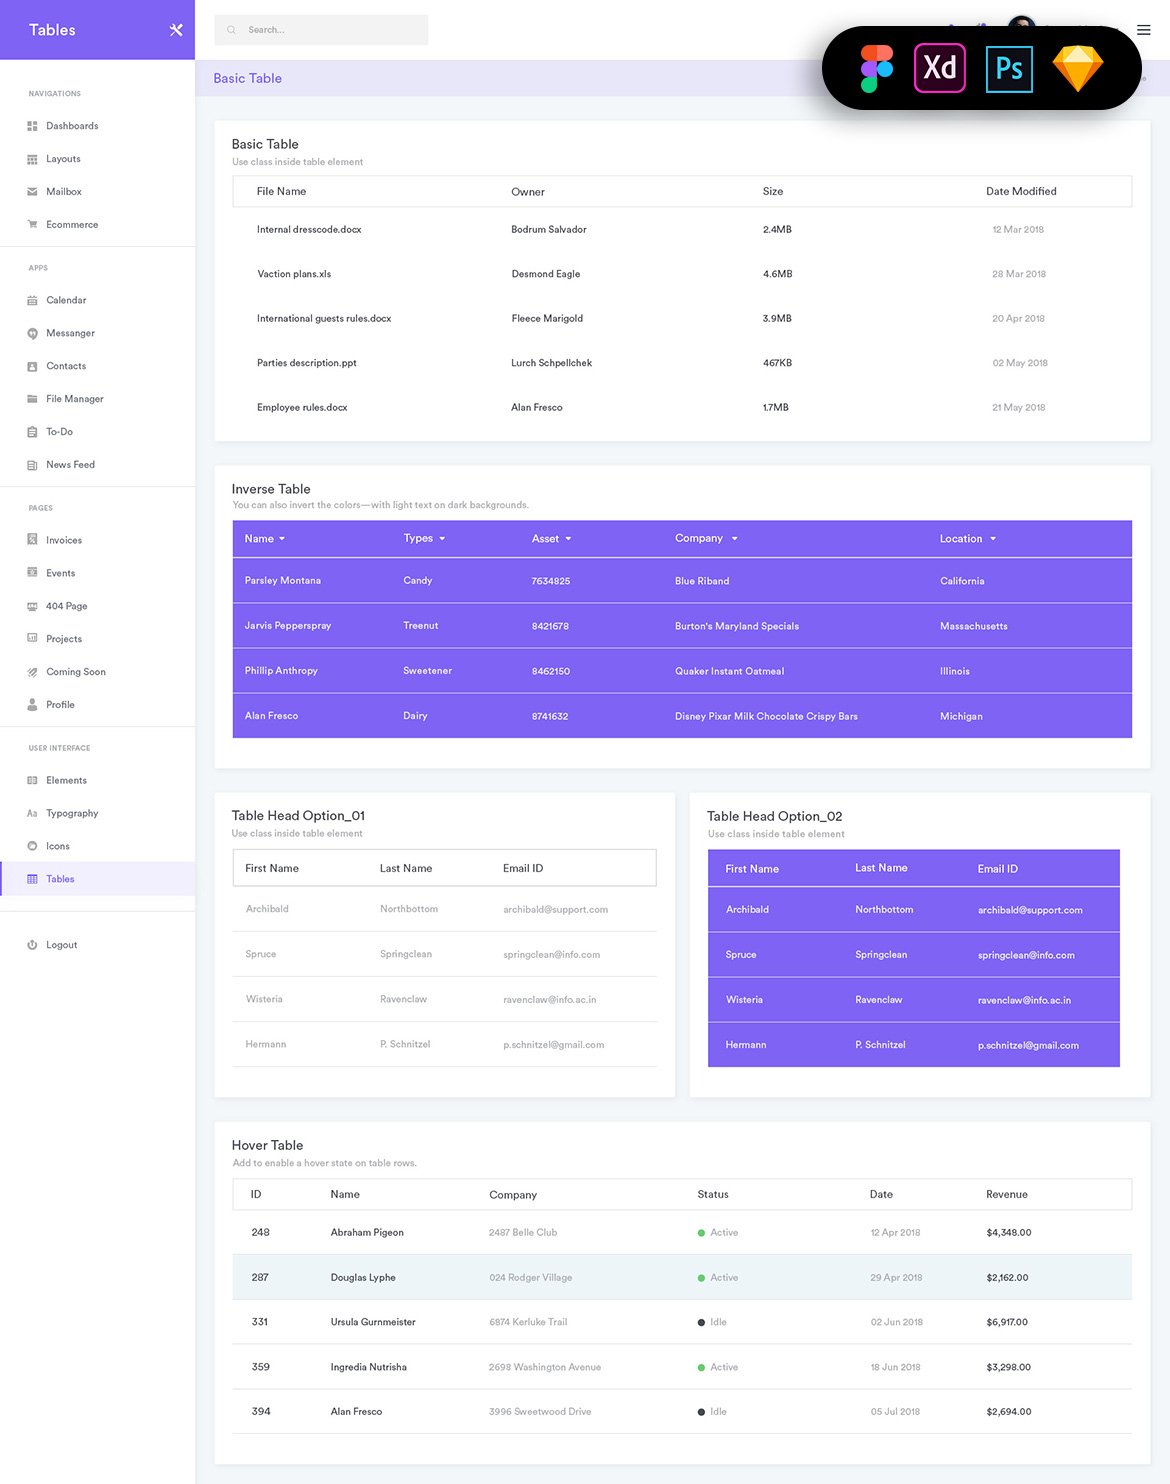 Tables Widgets Dashboard UI Kit preview image.